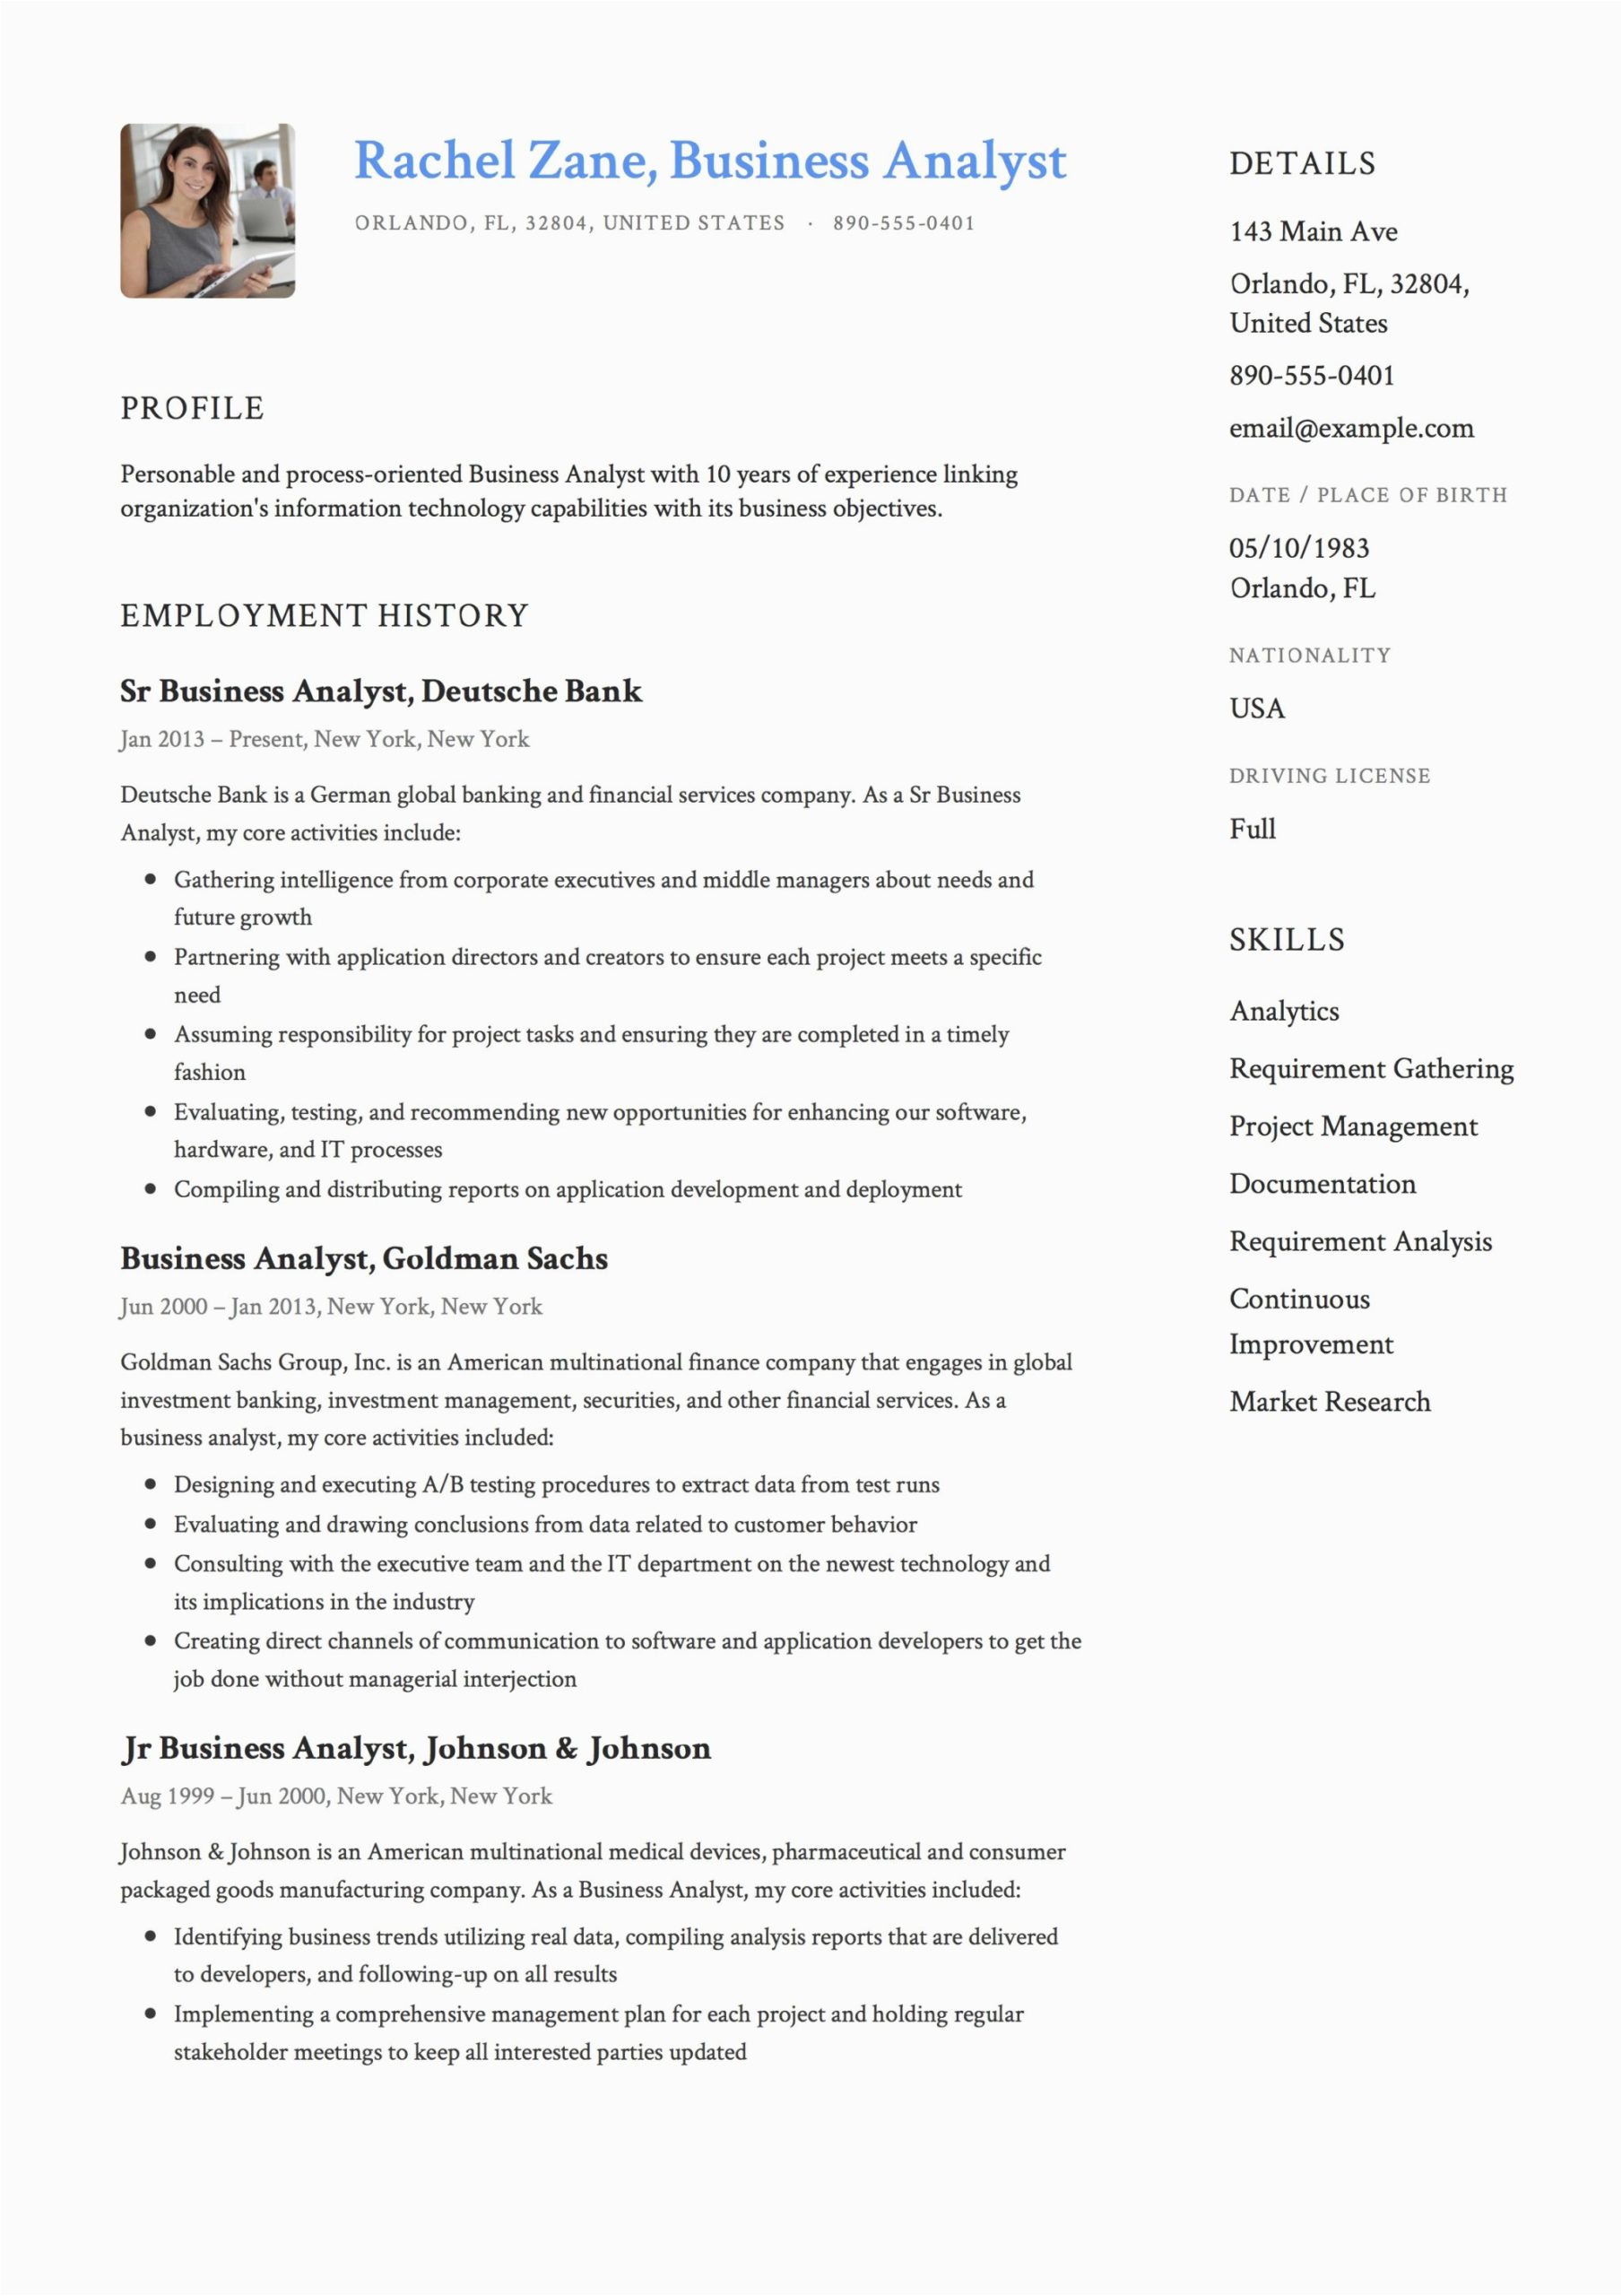 Sample Resume for It Business Analyst Position Business Analyst Resume & Guide 12 Templates Pdf